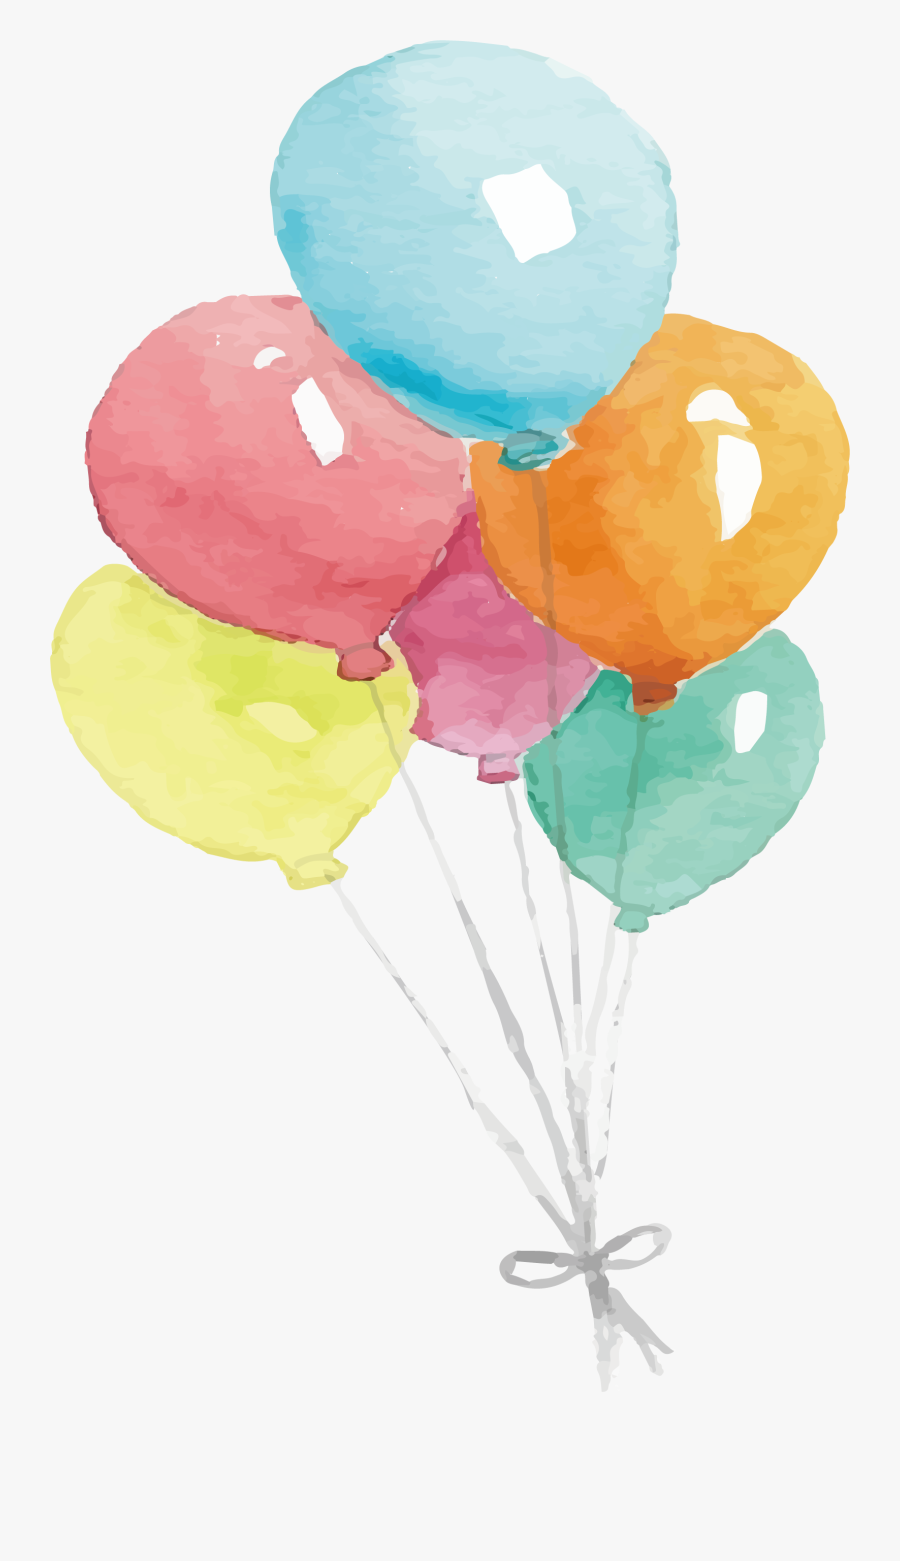 Balloon Watercolor Transprent Png Free Download Party - Watercolor Balloons Transparent Background, Transparent Clipart